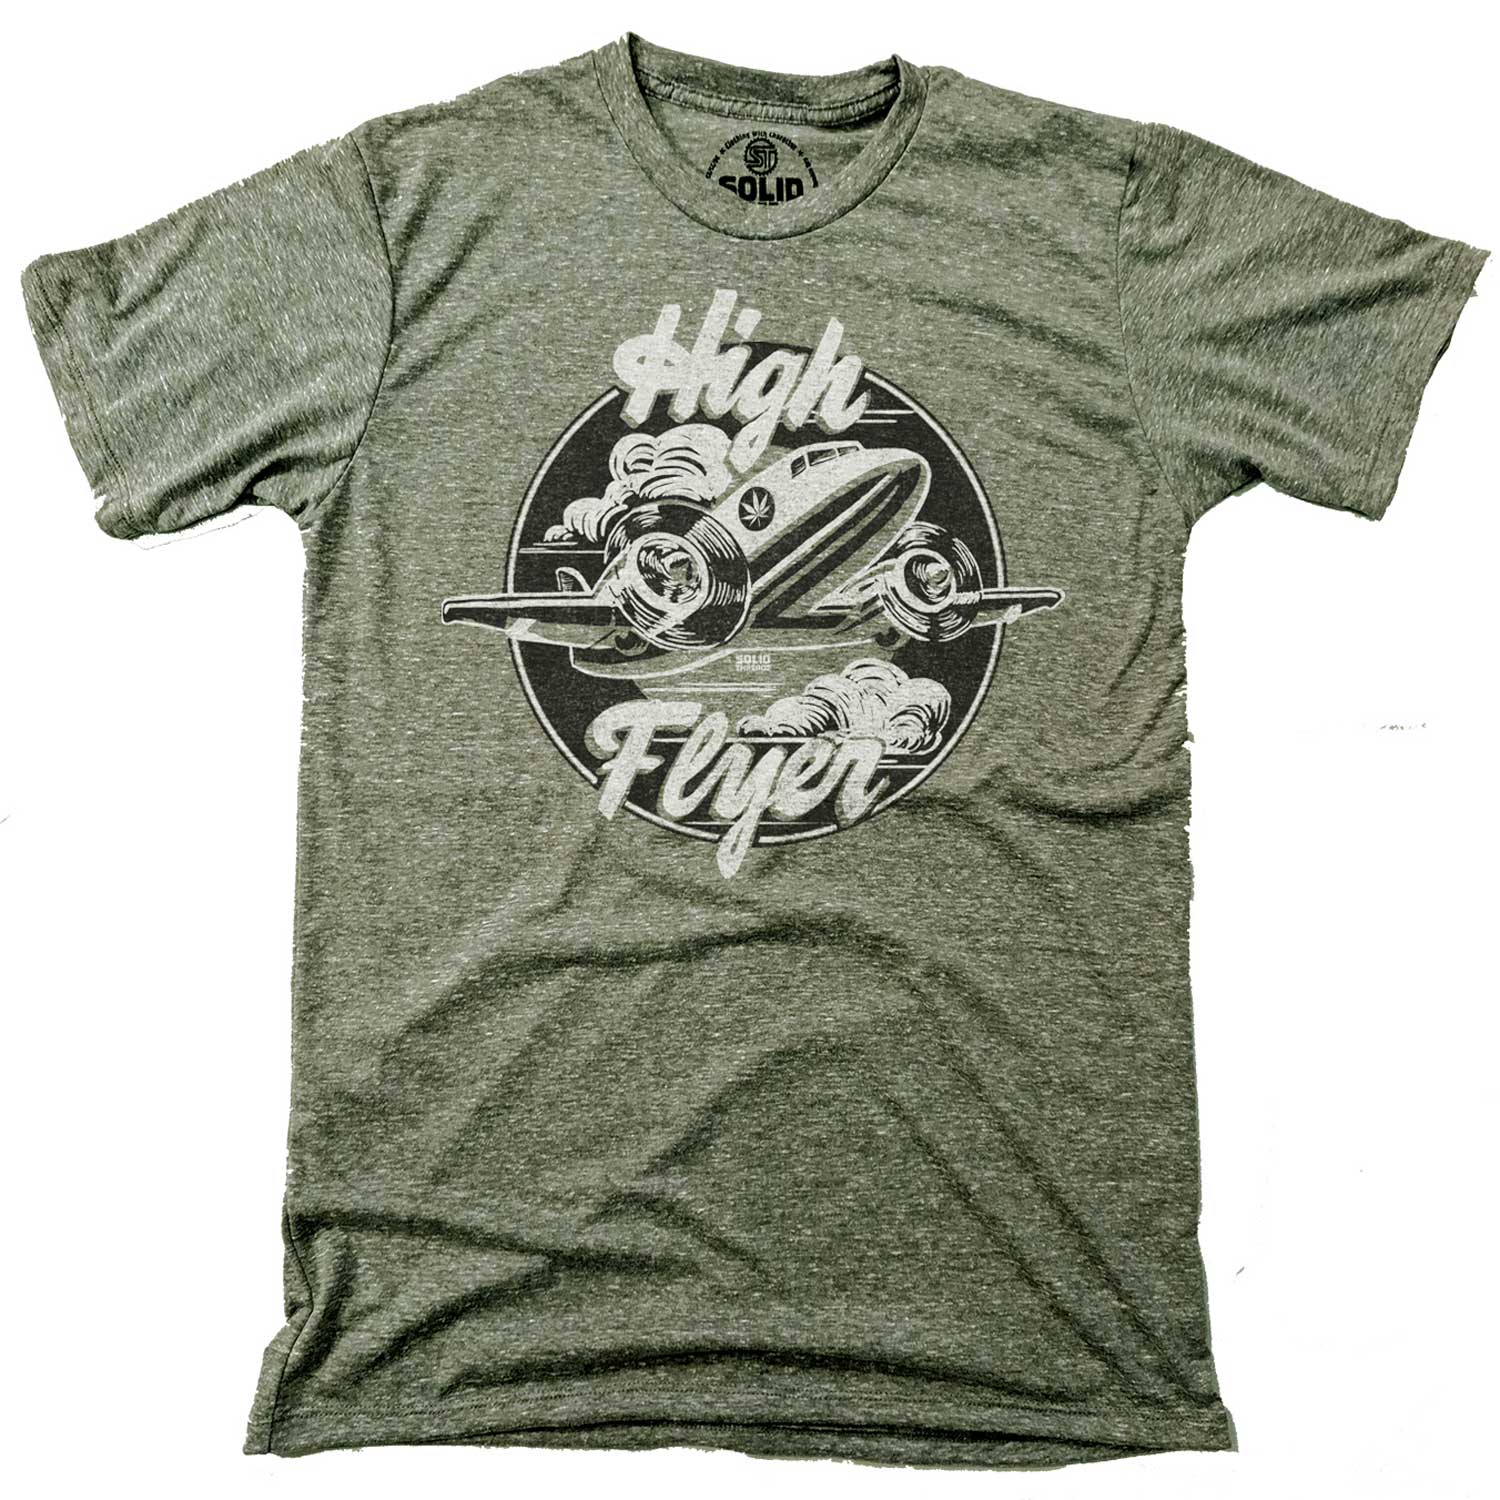 Men's High Flyer Vintage Inspired T-shirt | Retro Marijuana Tee with Airplane Graphic | Solid Threads